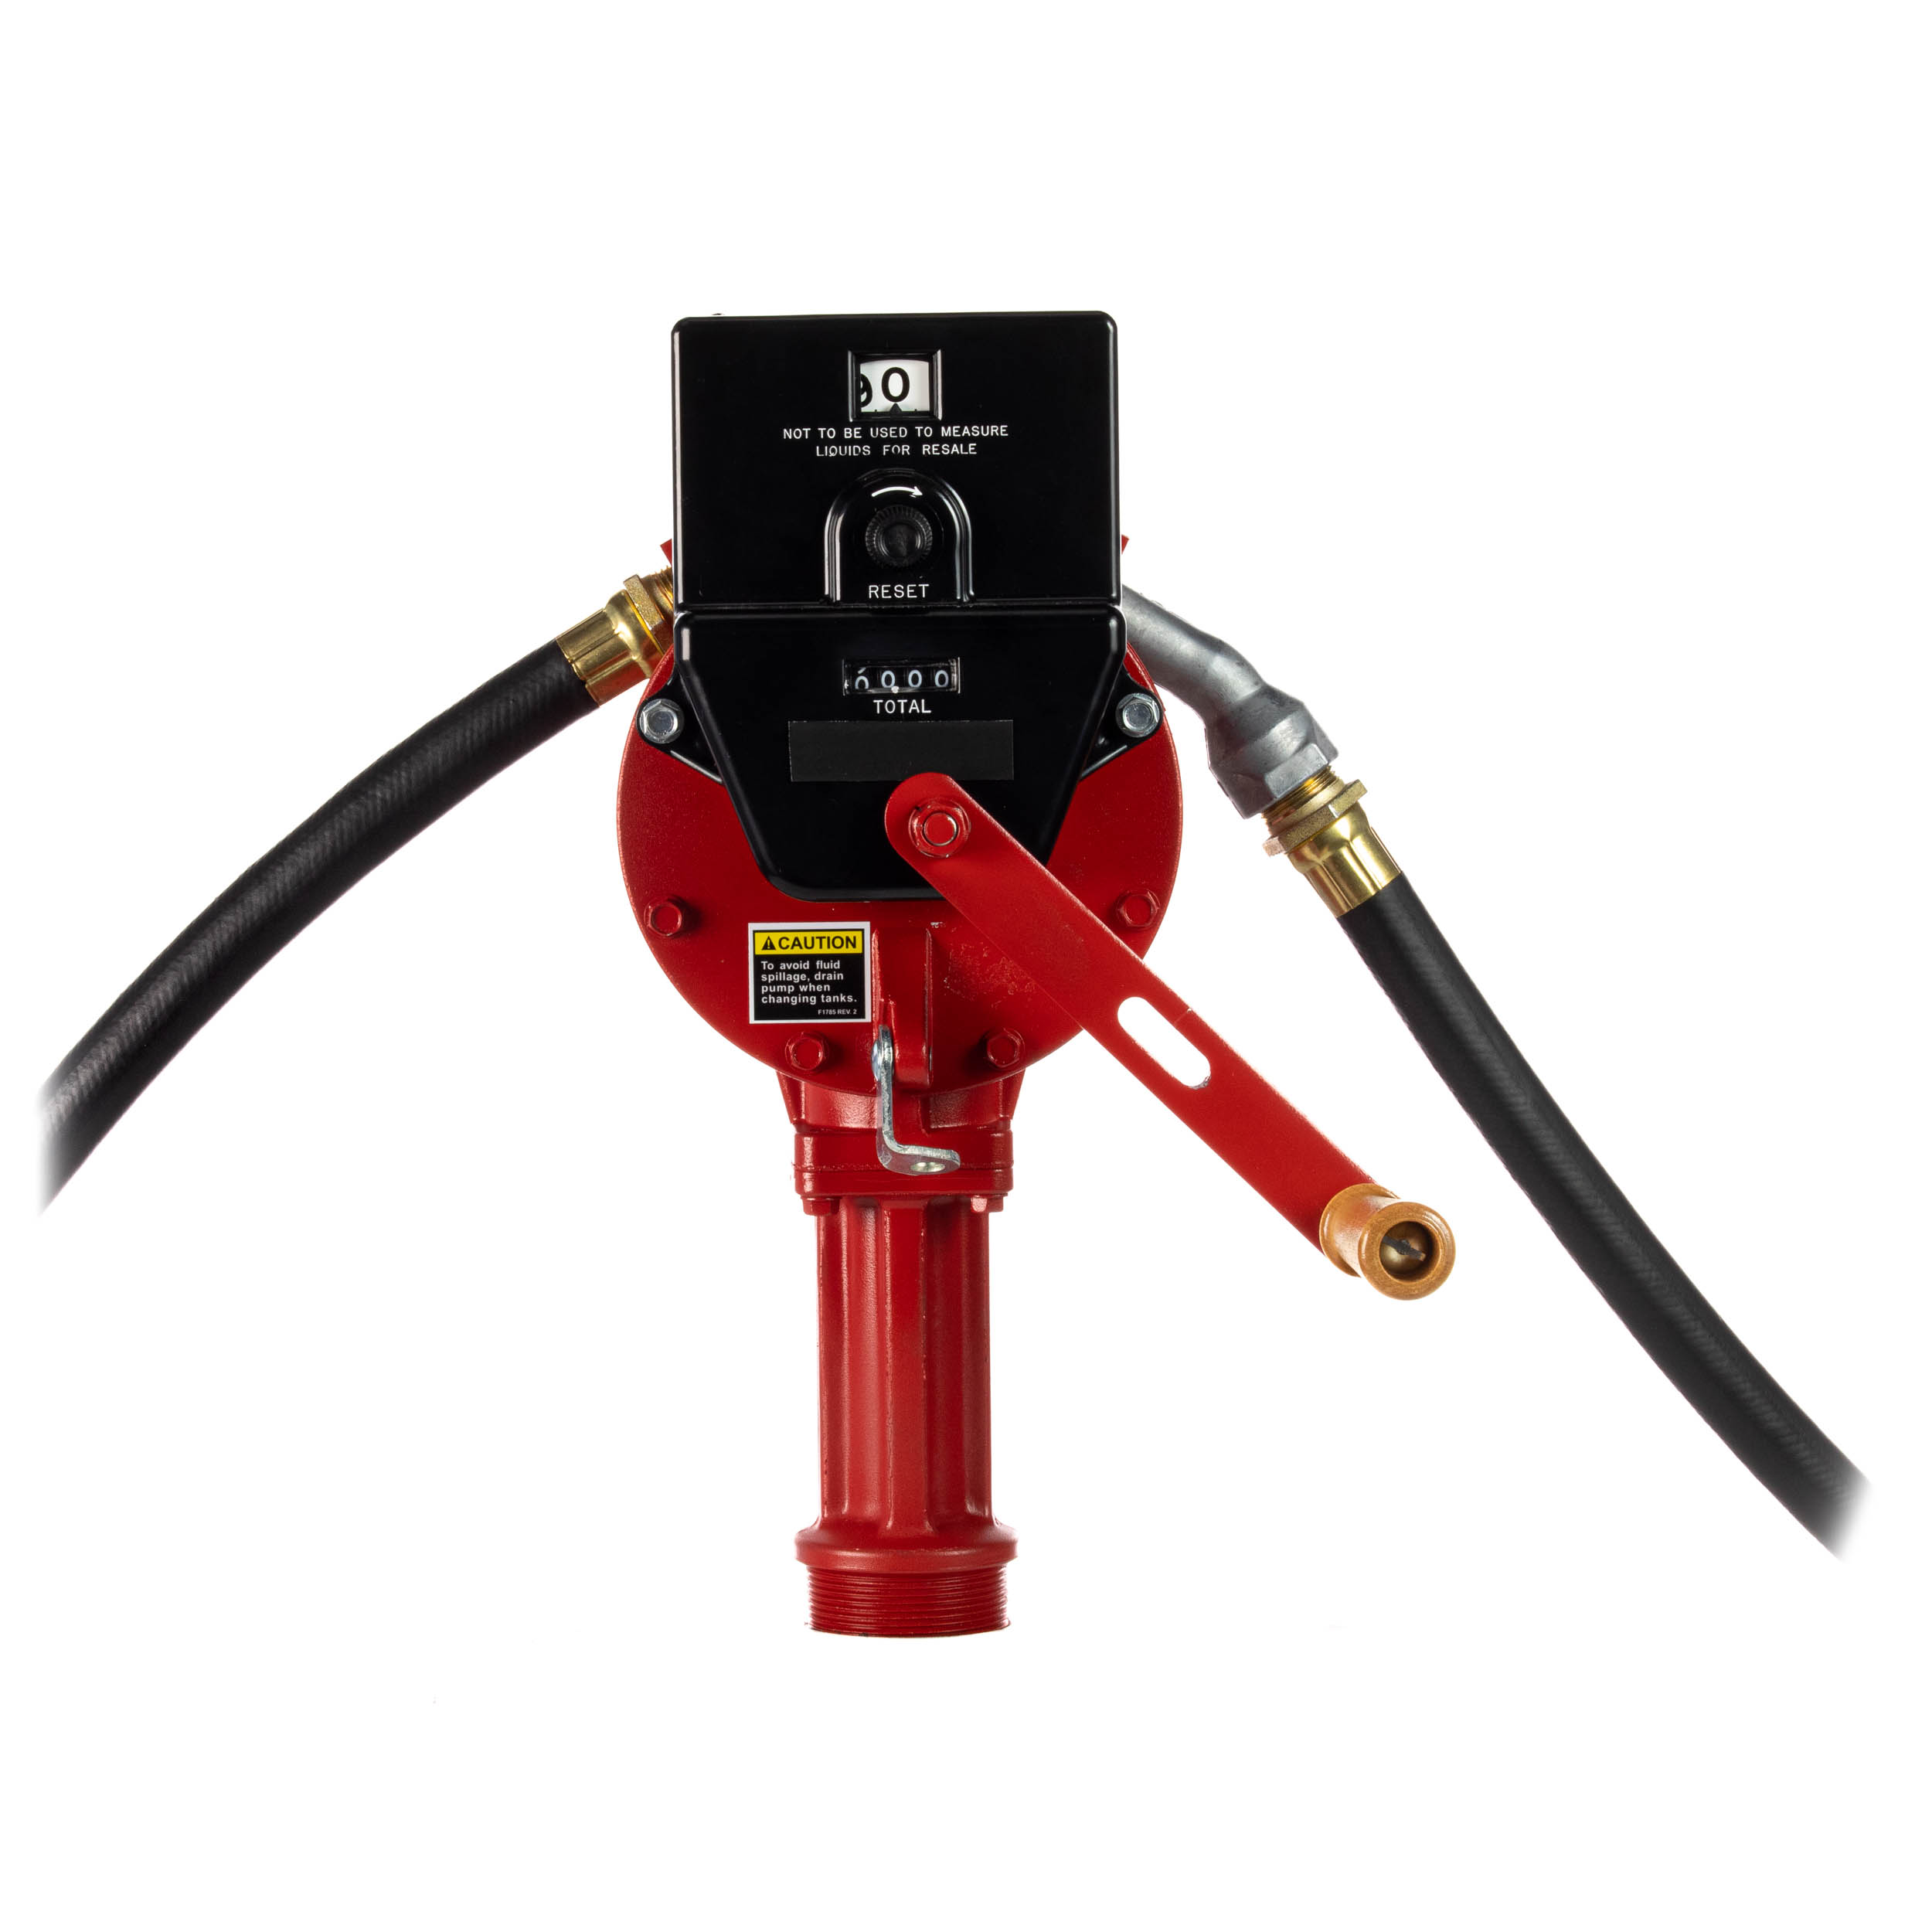 Fill-Rite FR112C Rotary Hand Pump Complete with Counter - Fast Shipping - Consumer Petroleum Pumps